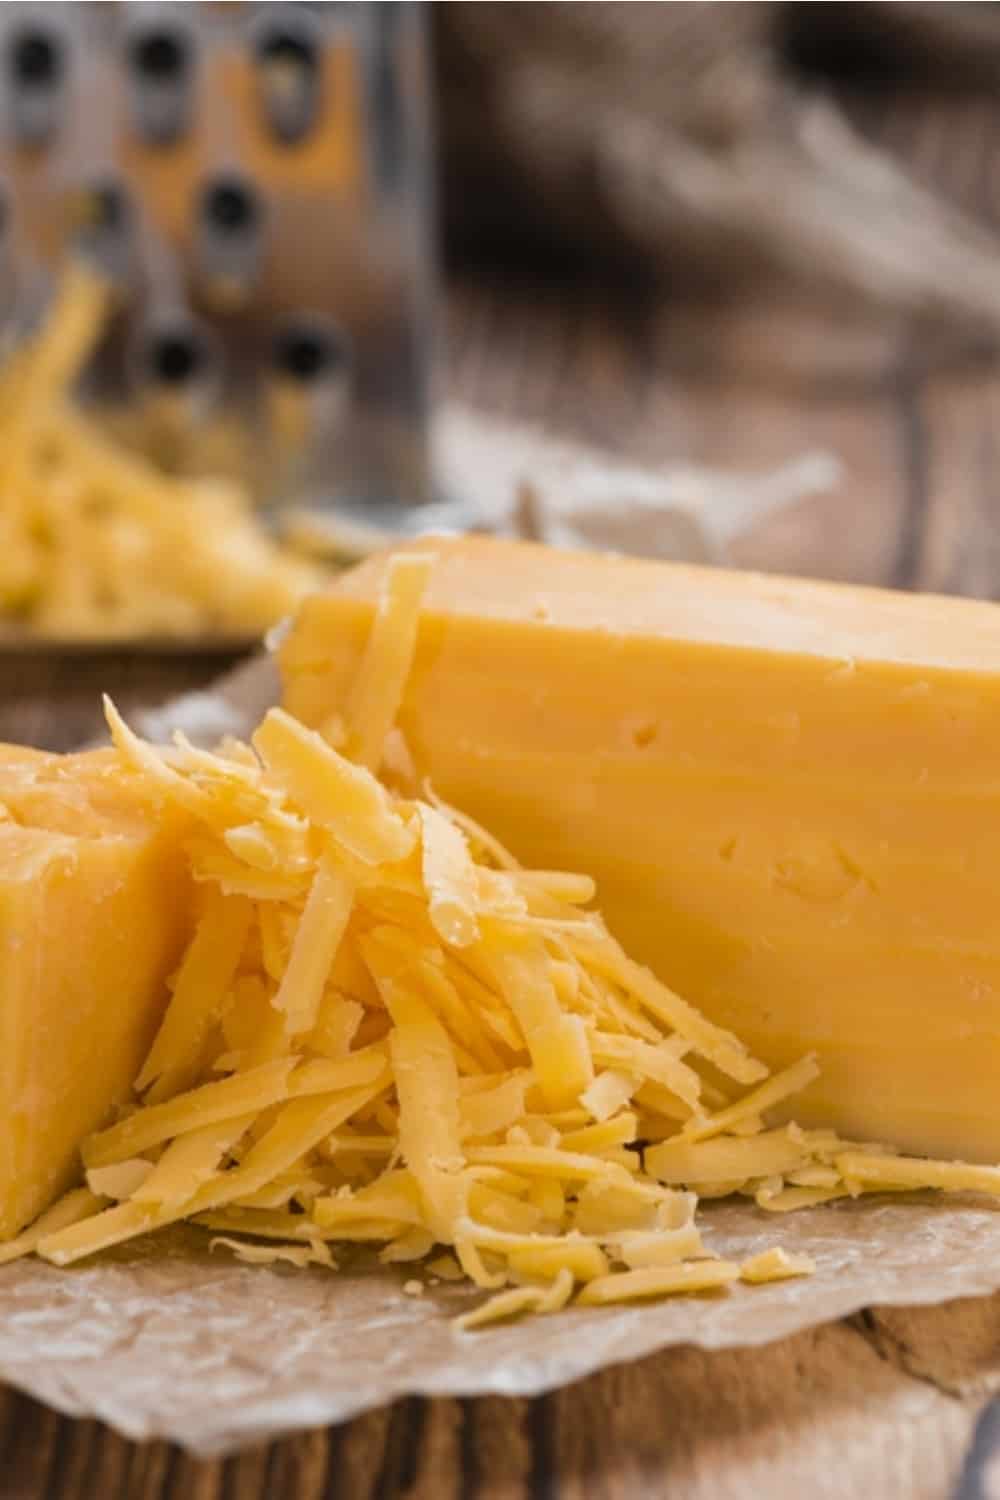 Cheddar Cheese on a wooden table